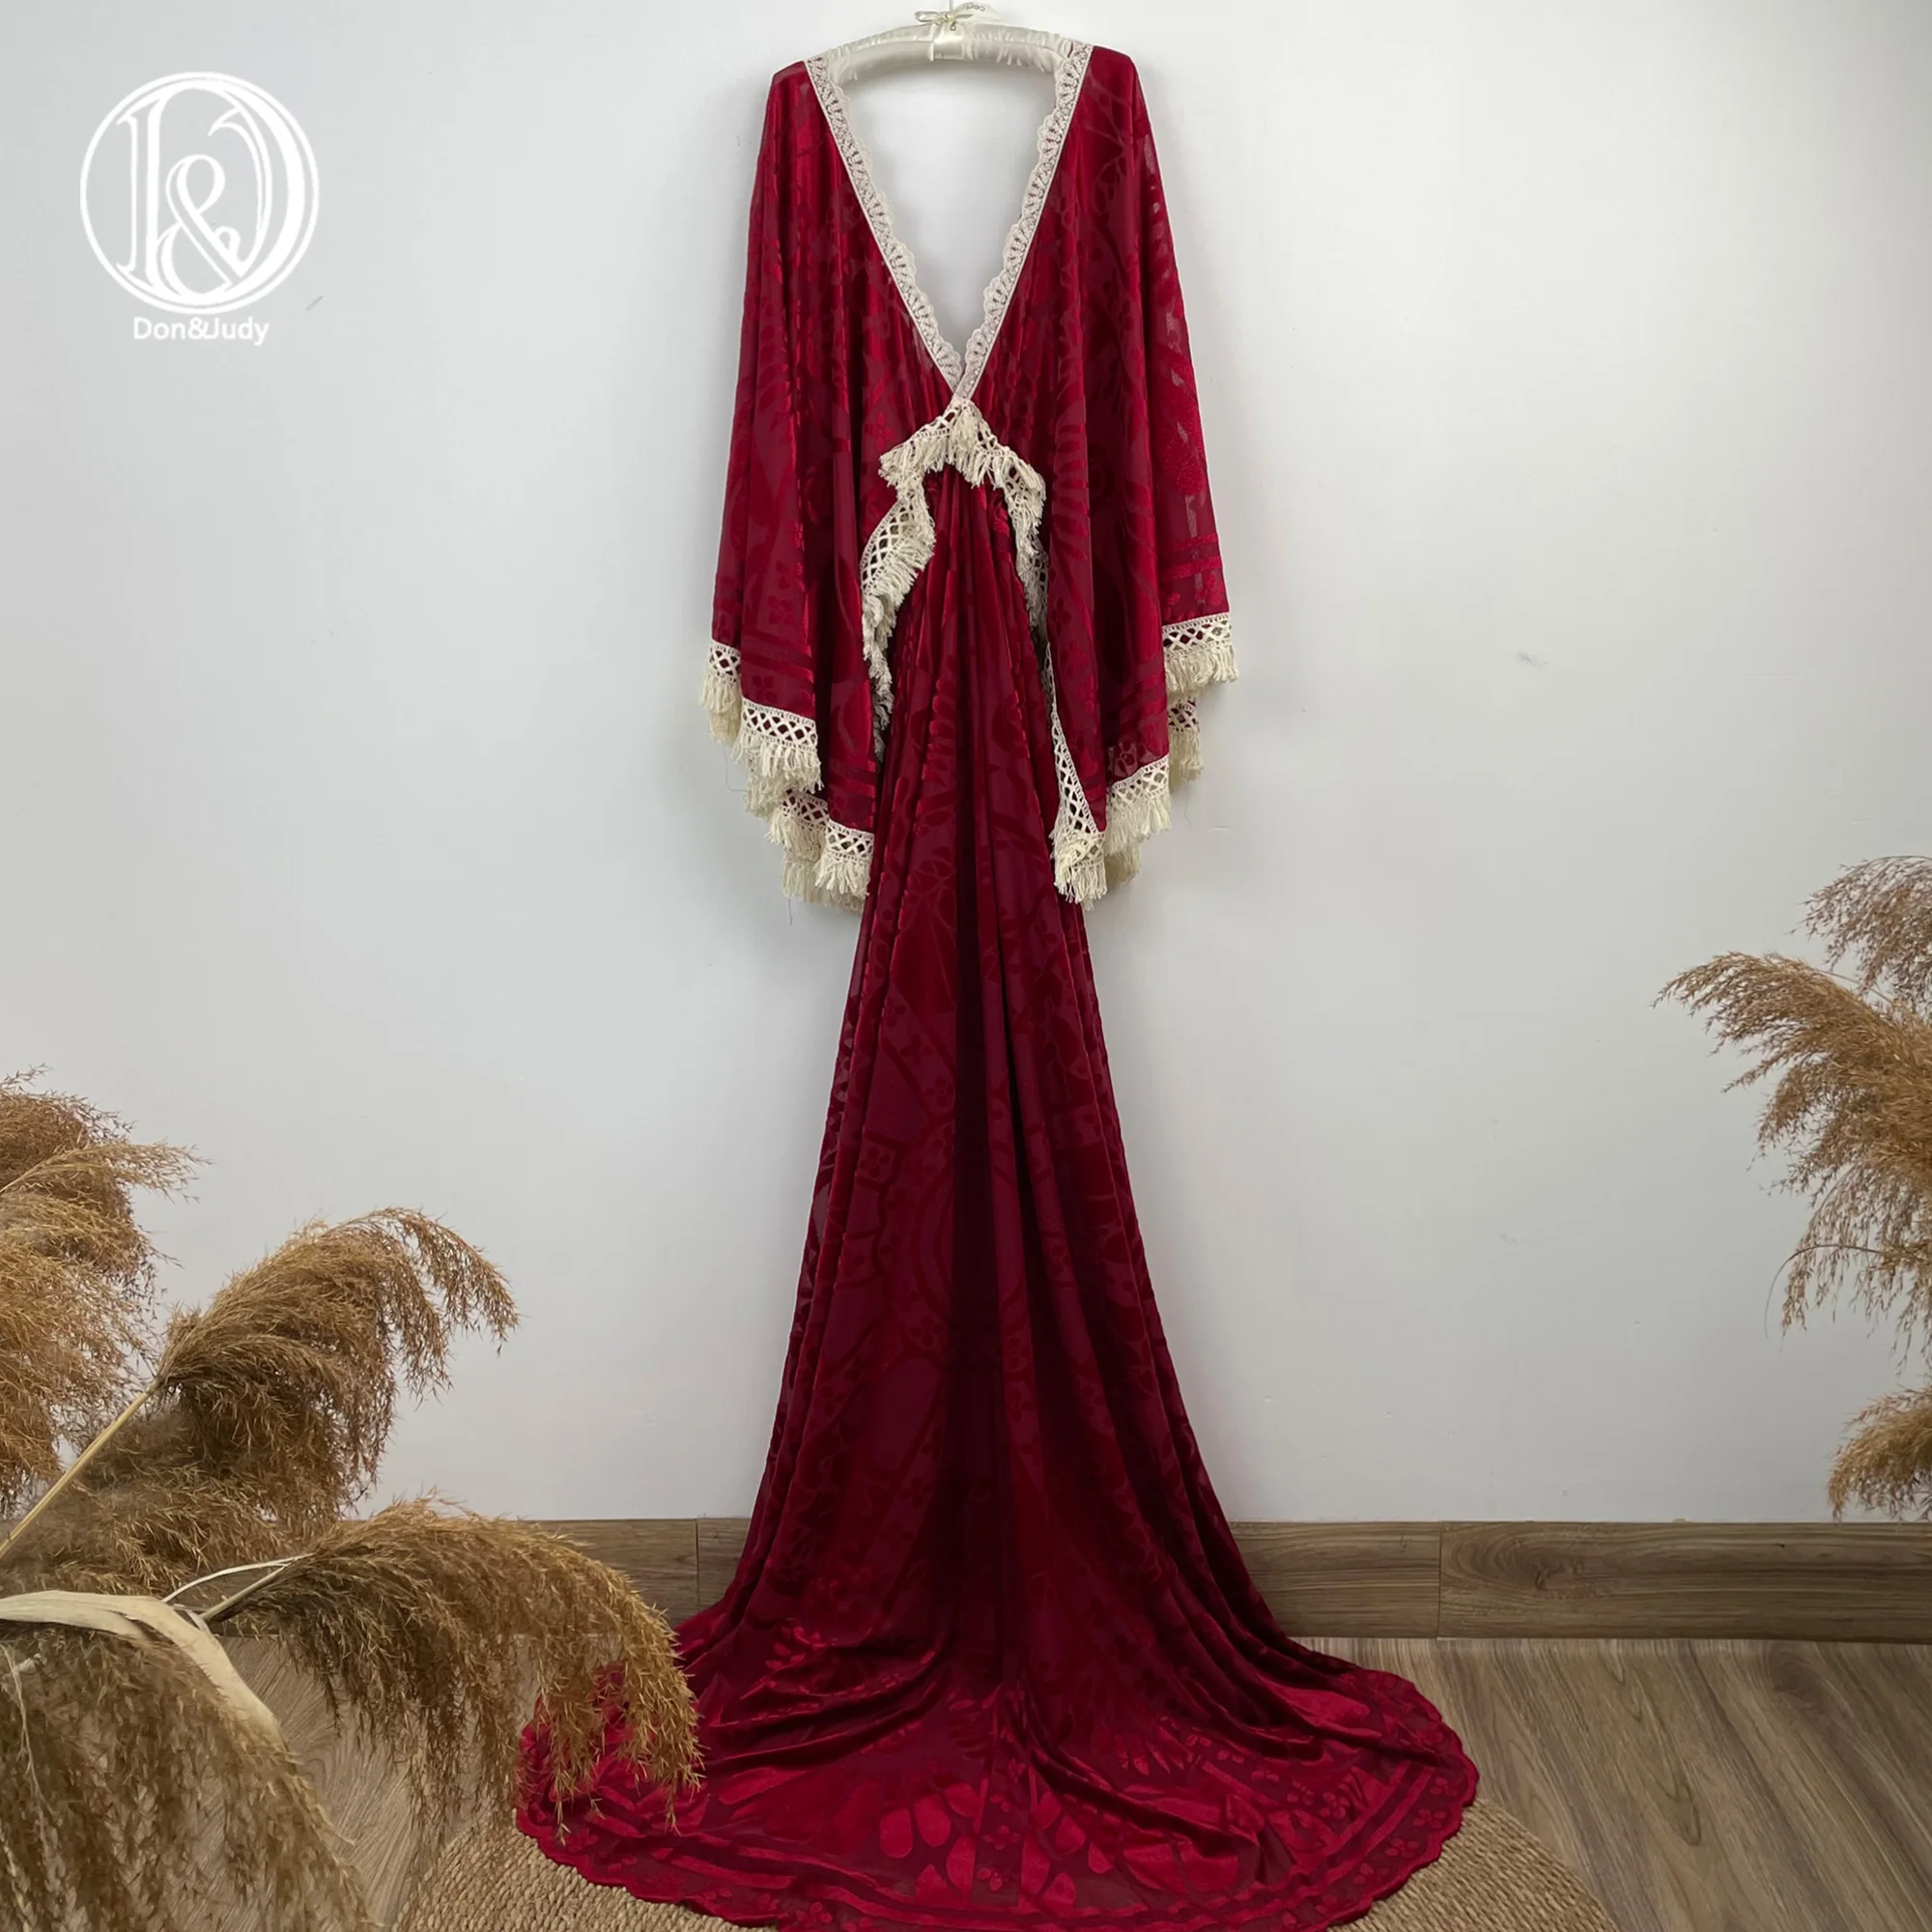 Don&Judy Vintage Boho Velvet Christmas Maternity Dress Photography Photoshoot Video Pregnancy Gowns Baby Shower Gift Woman Robe